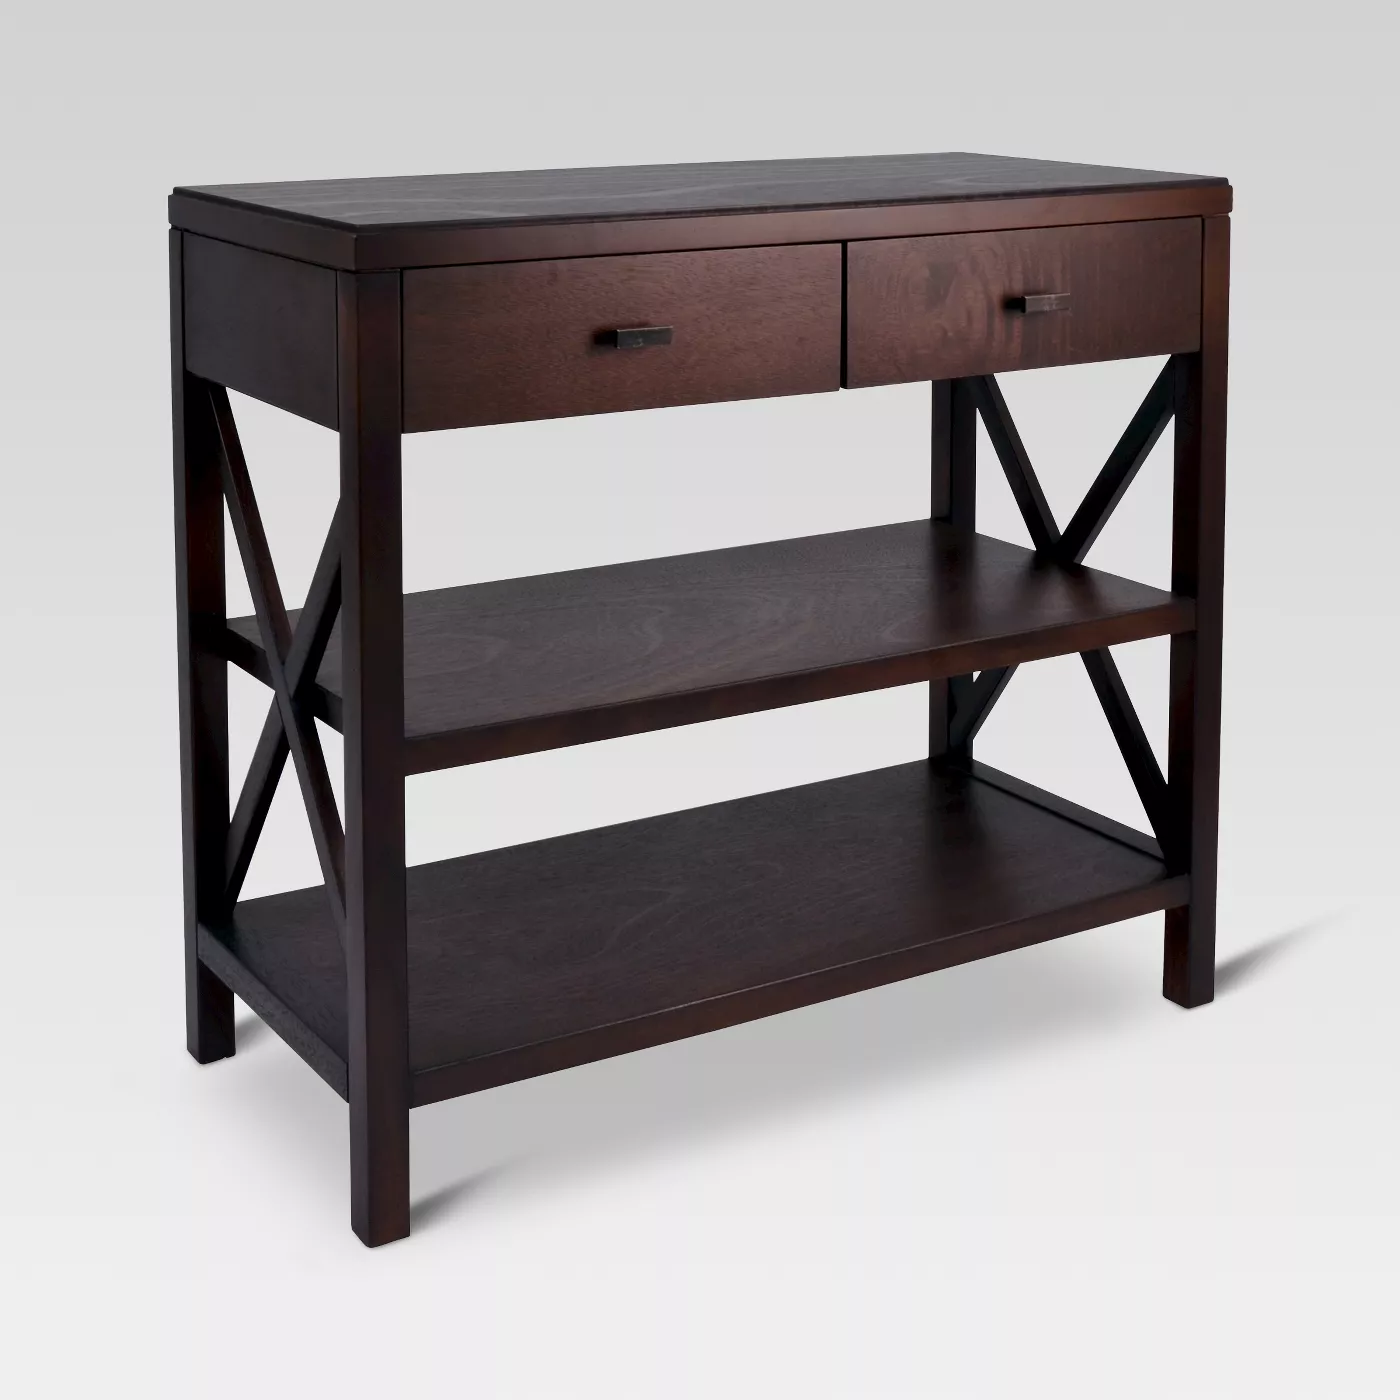 Threshold Owings Console Table with 2 Shelf and Drawers